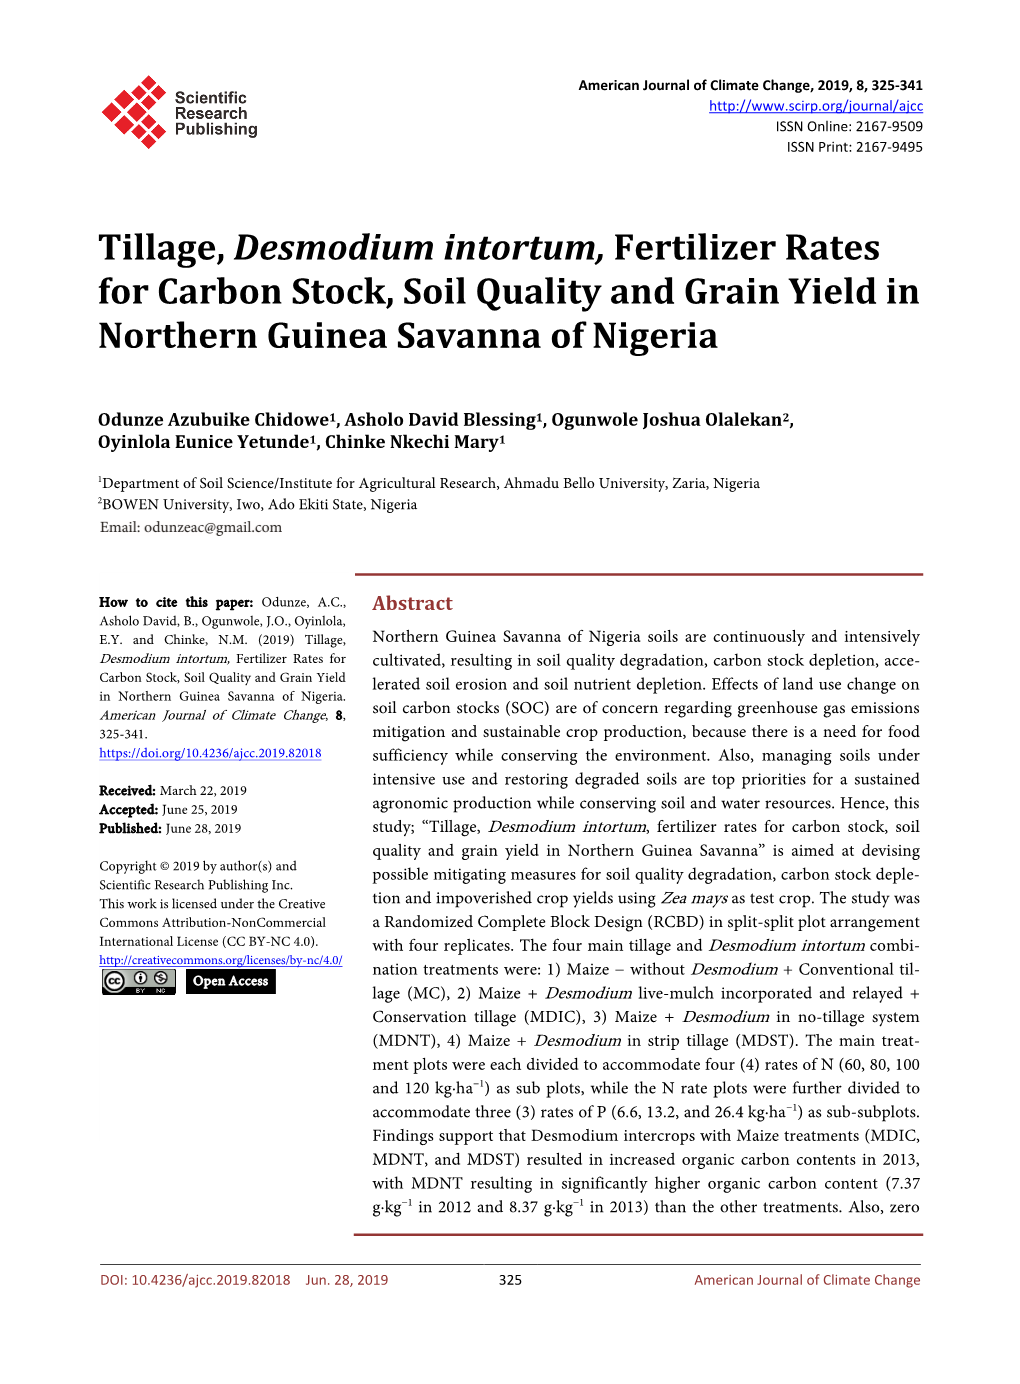 Tillage, Desmodium Intortum, Fertilizer Rates for Carbon Stock, Soil Quality and Grain Yield in Northern Guinea Savanna of Nigeria